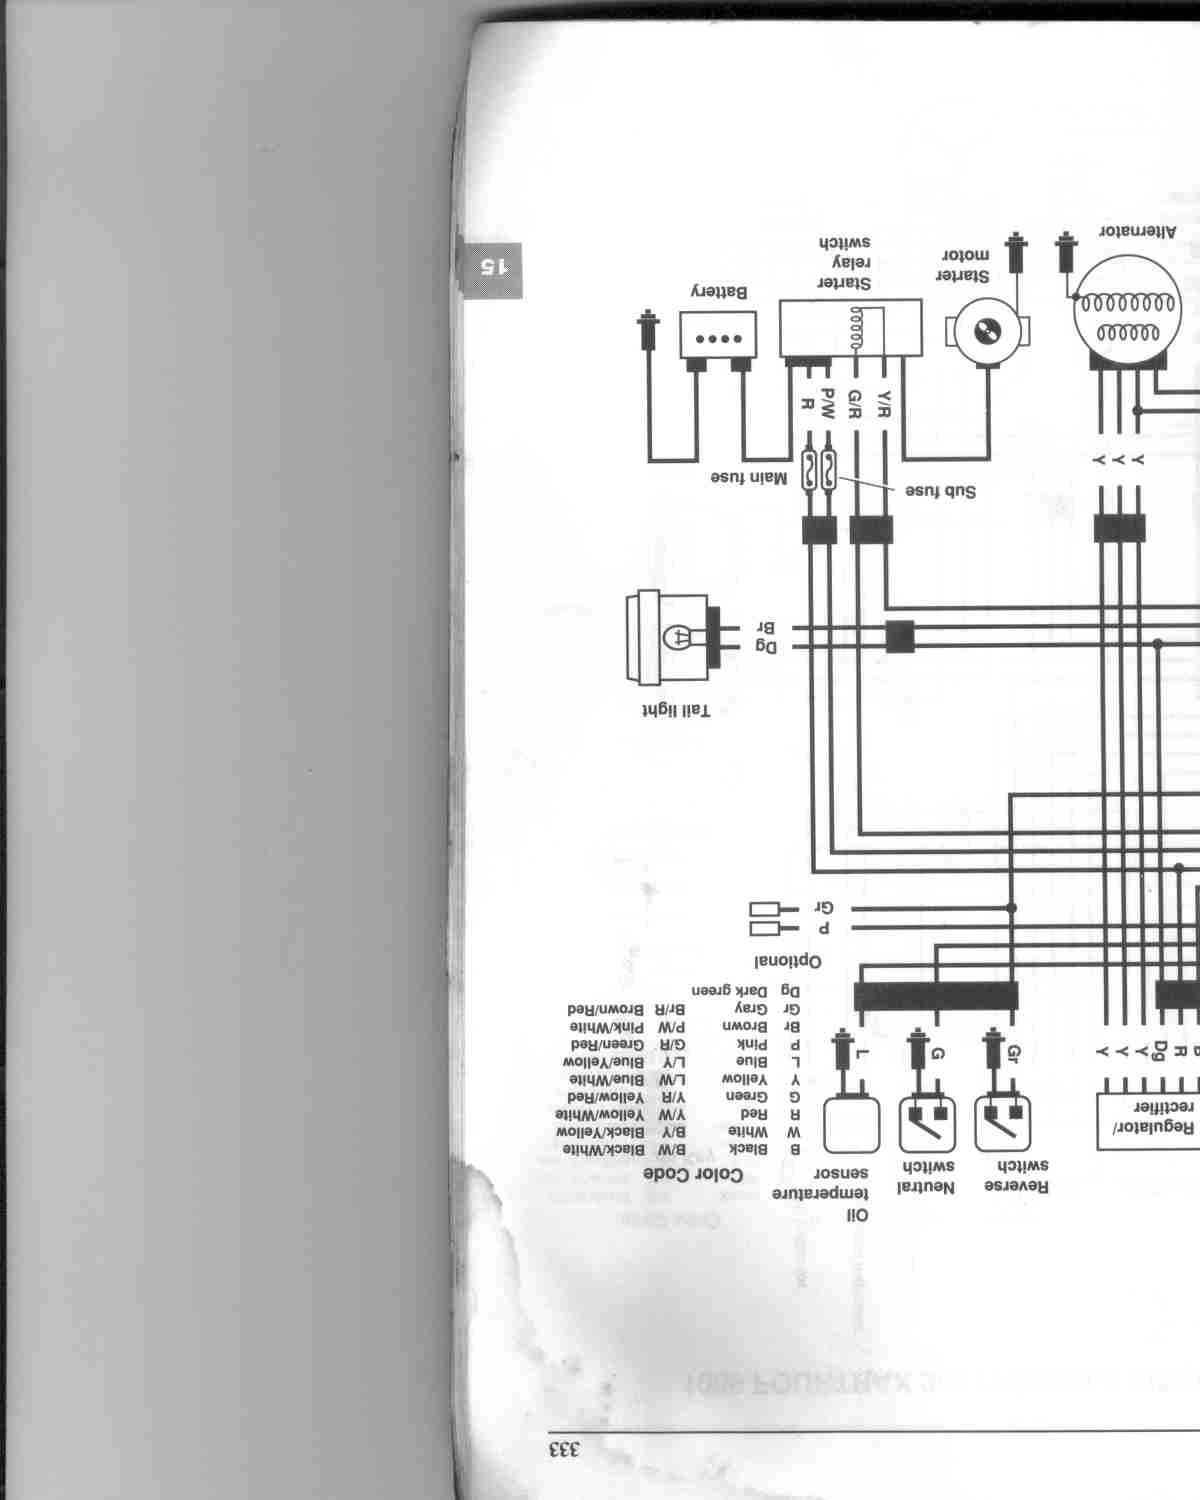 Honda Trx 300 Wiring Diagram from atvconnection.com